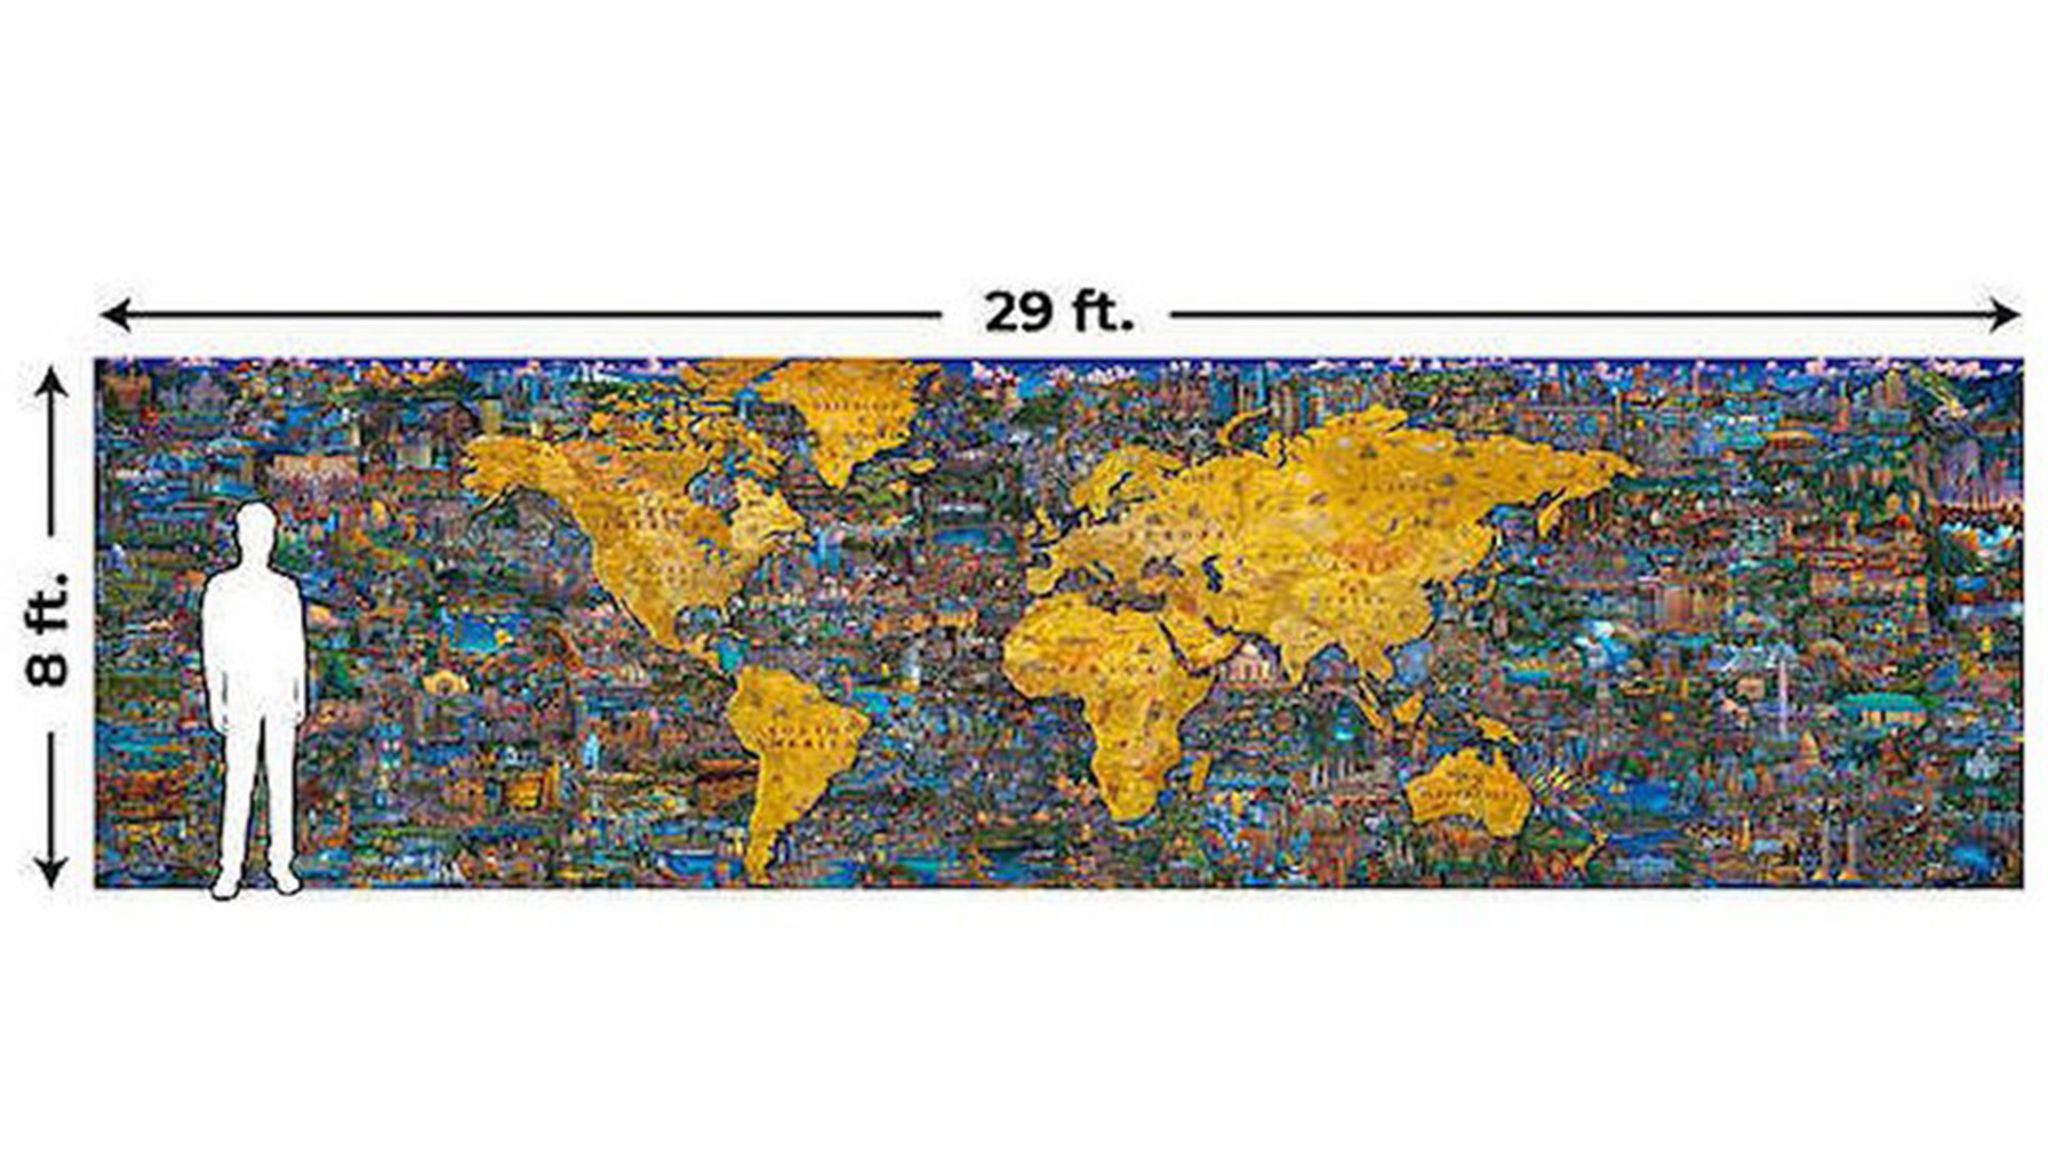 world-s-largest-puzzle-goes-on-sale-at-costco-here-s-how-much-it